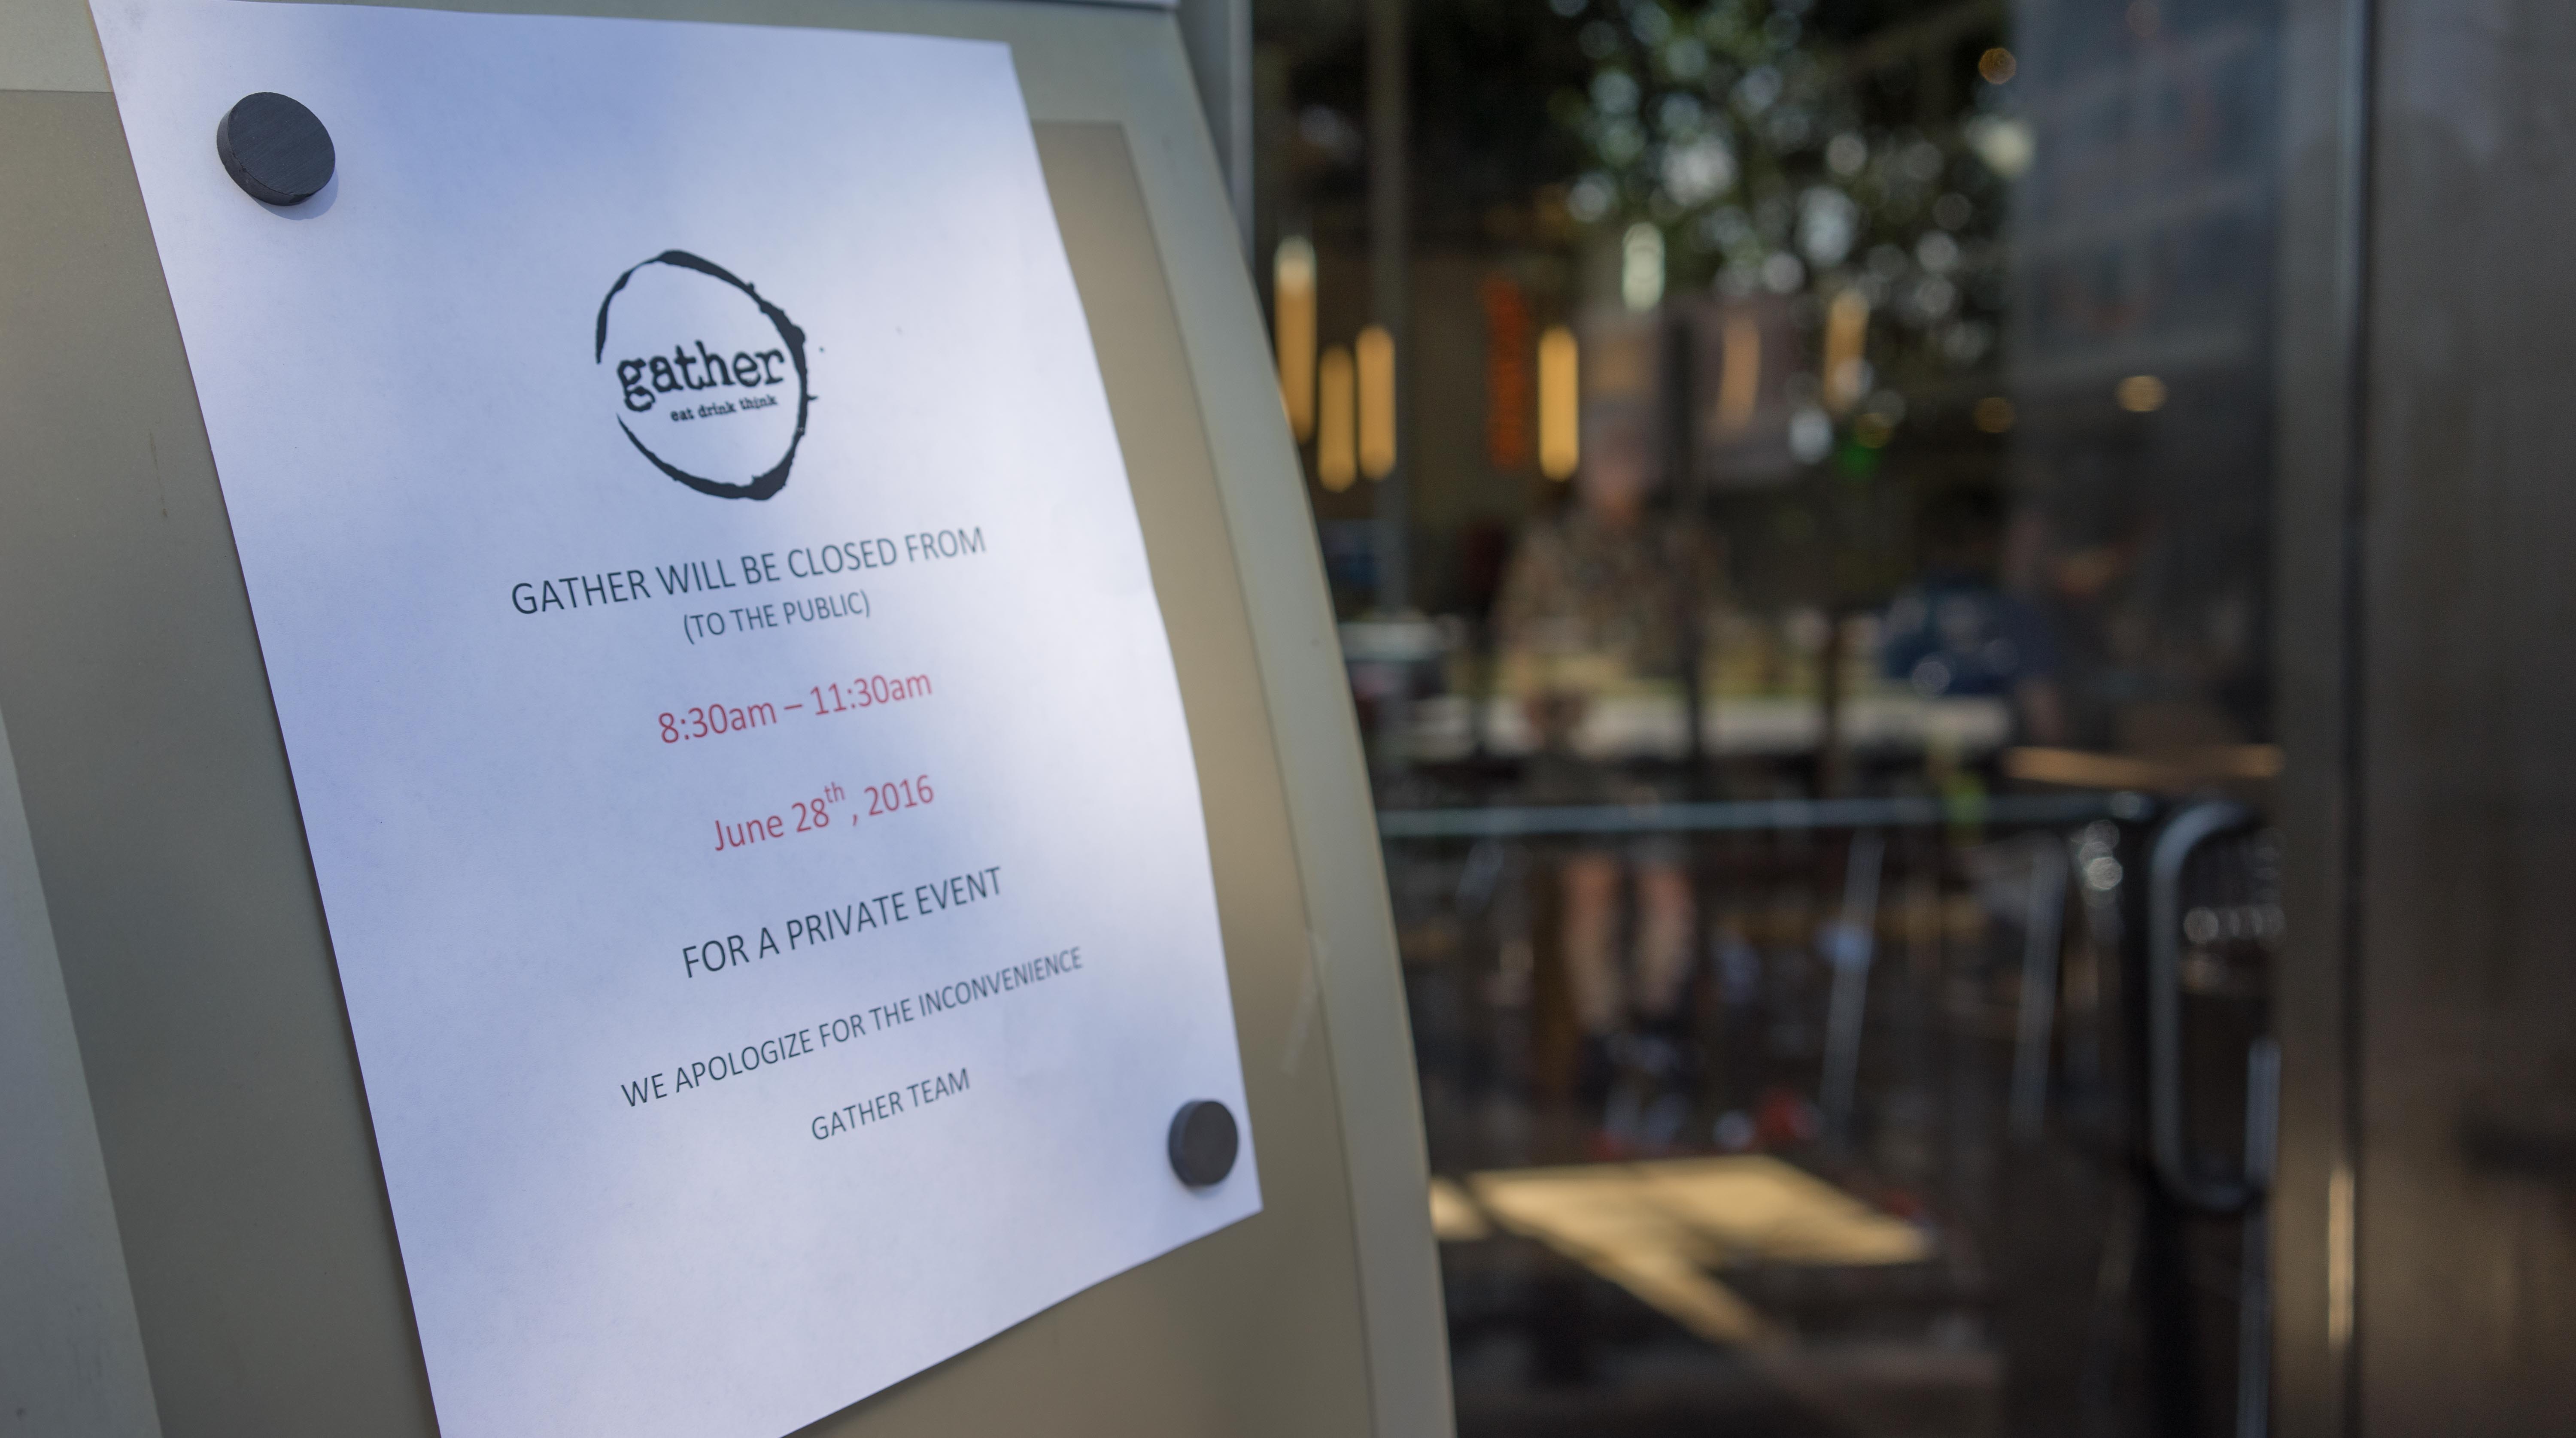 Closure notice posted for the Galvanize cafe, Gather.